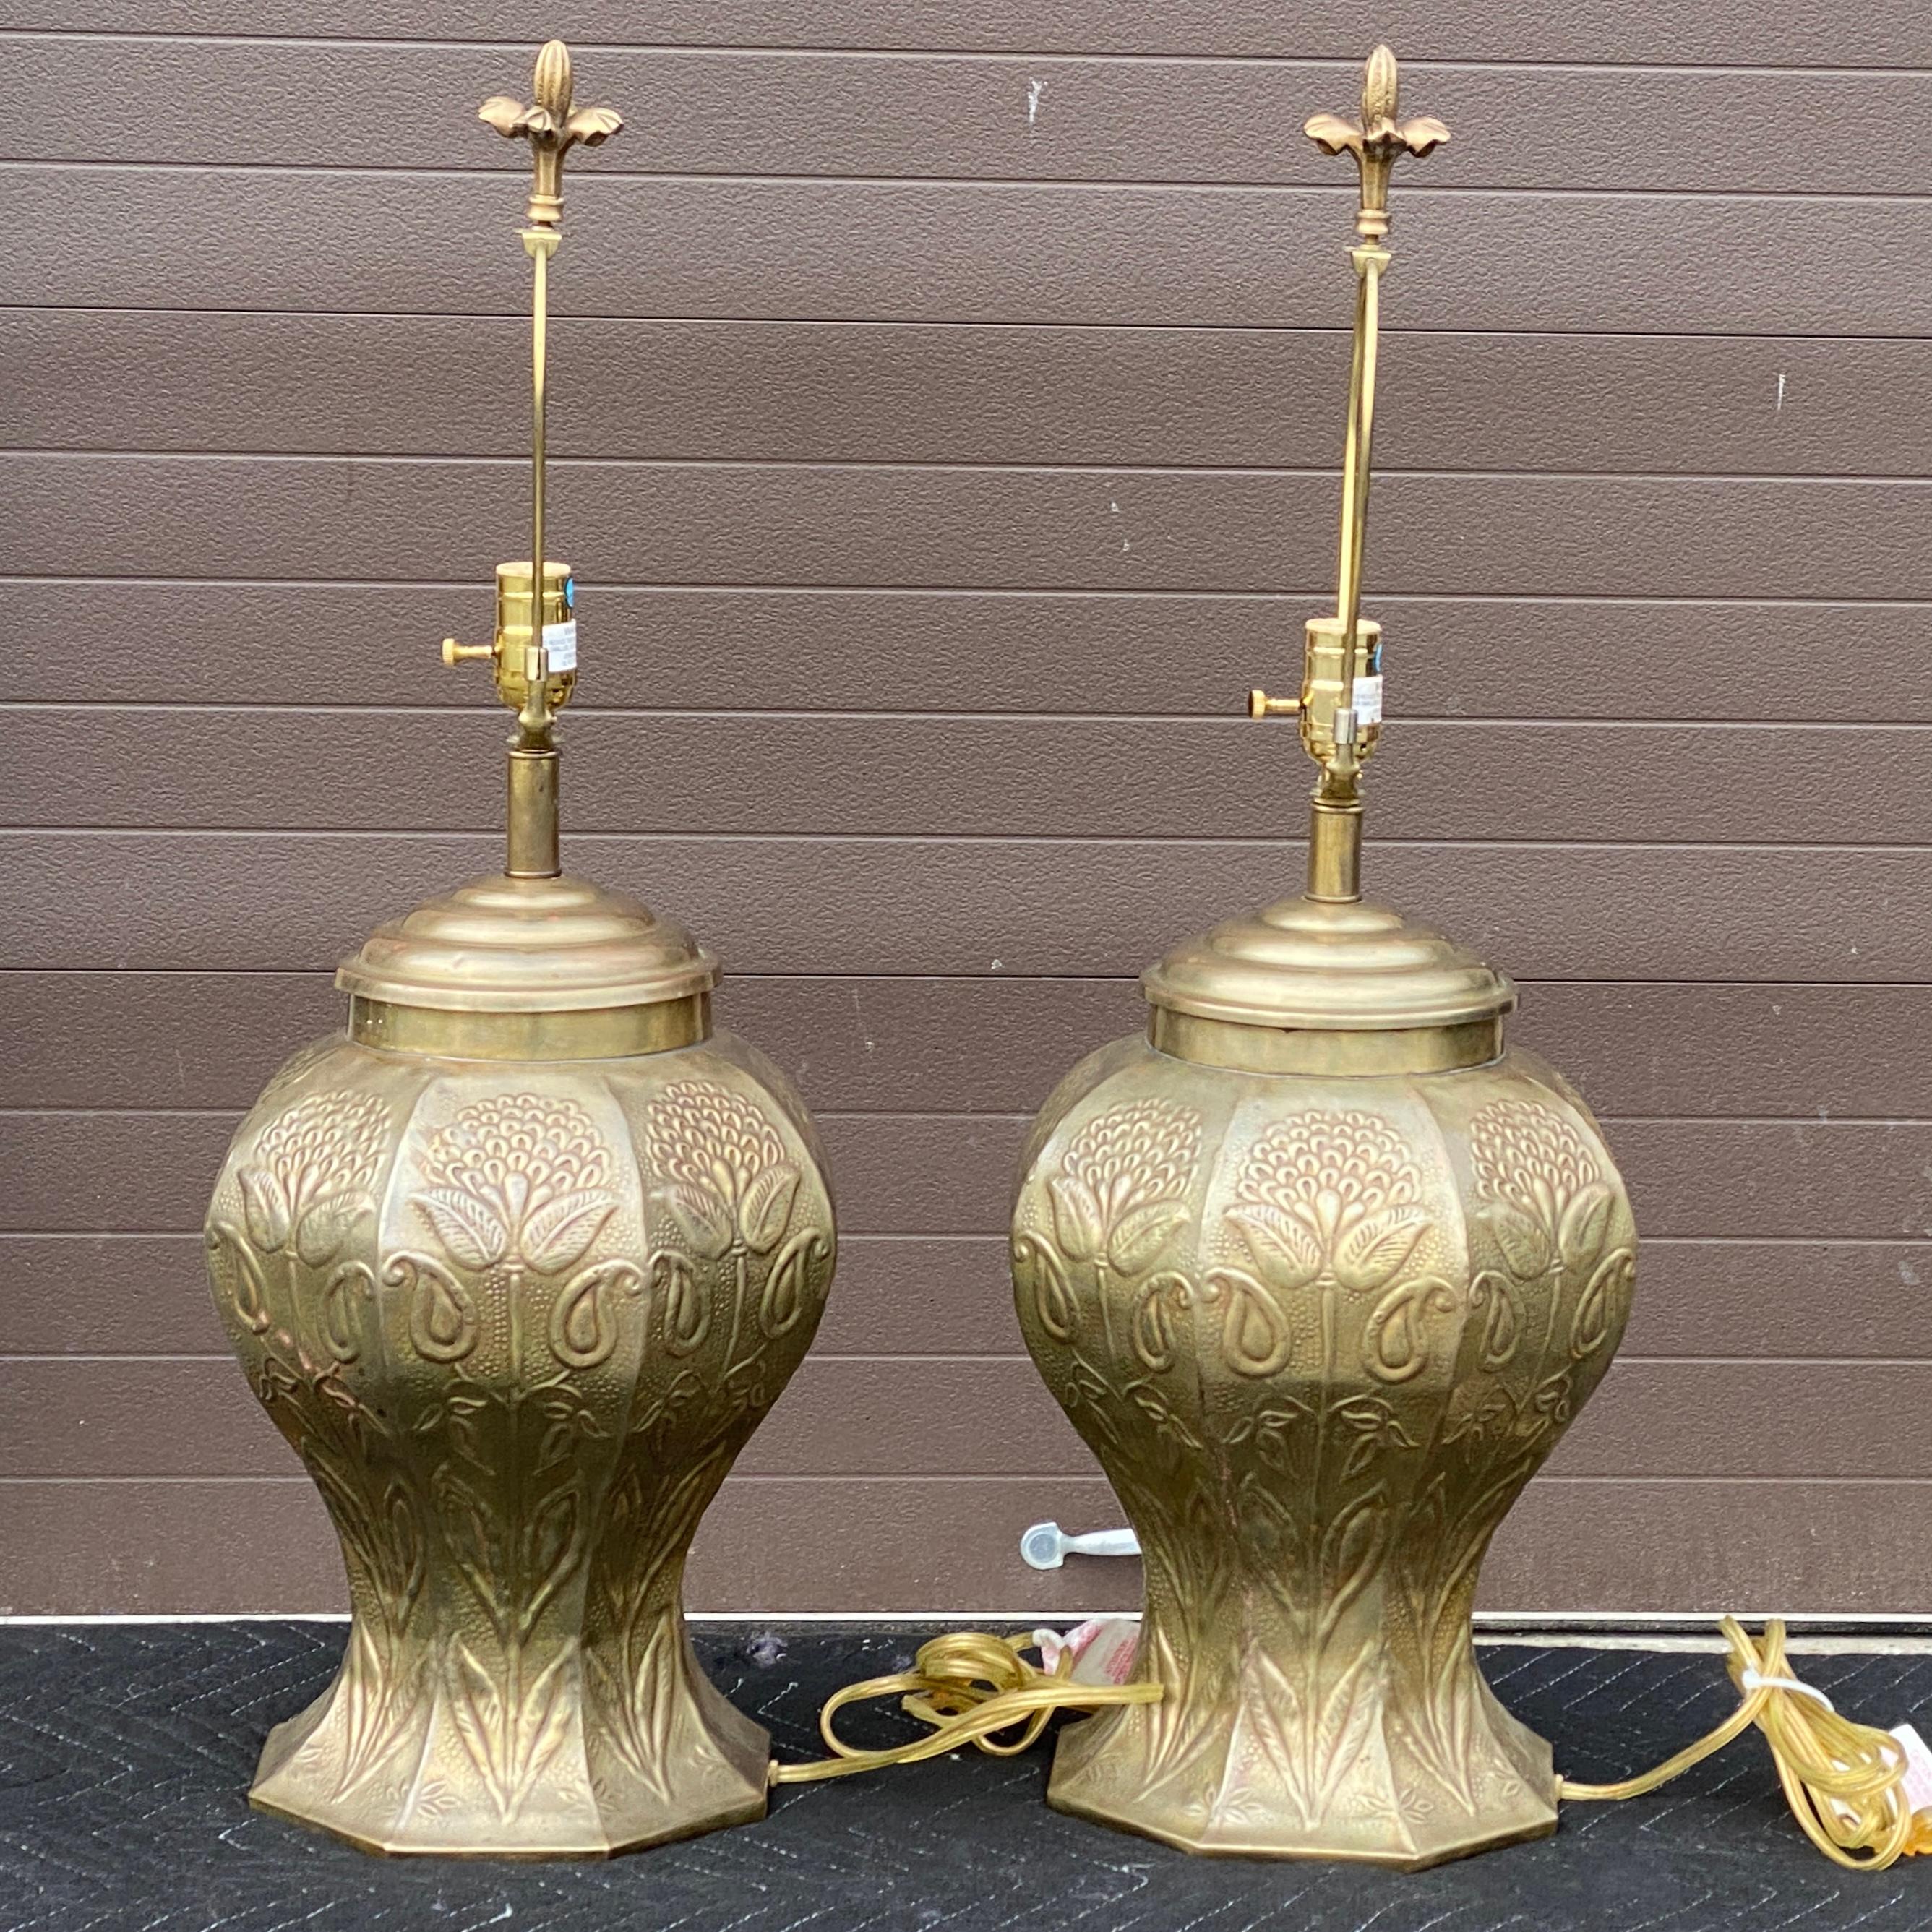 Pair John Richard Hammered Brass Table Lamps With Floral Finials For Sale 1